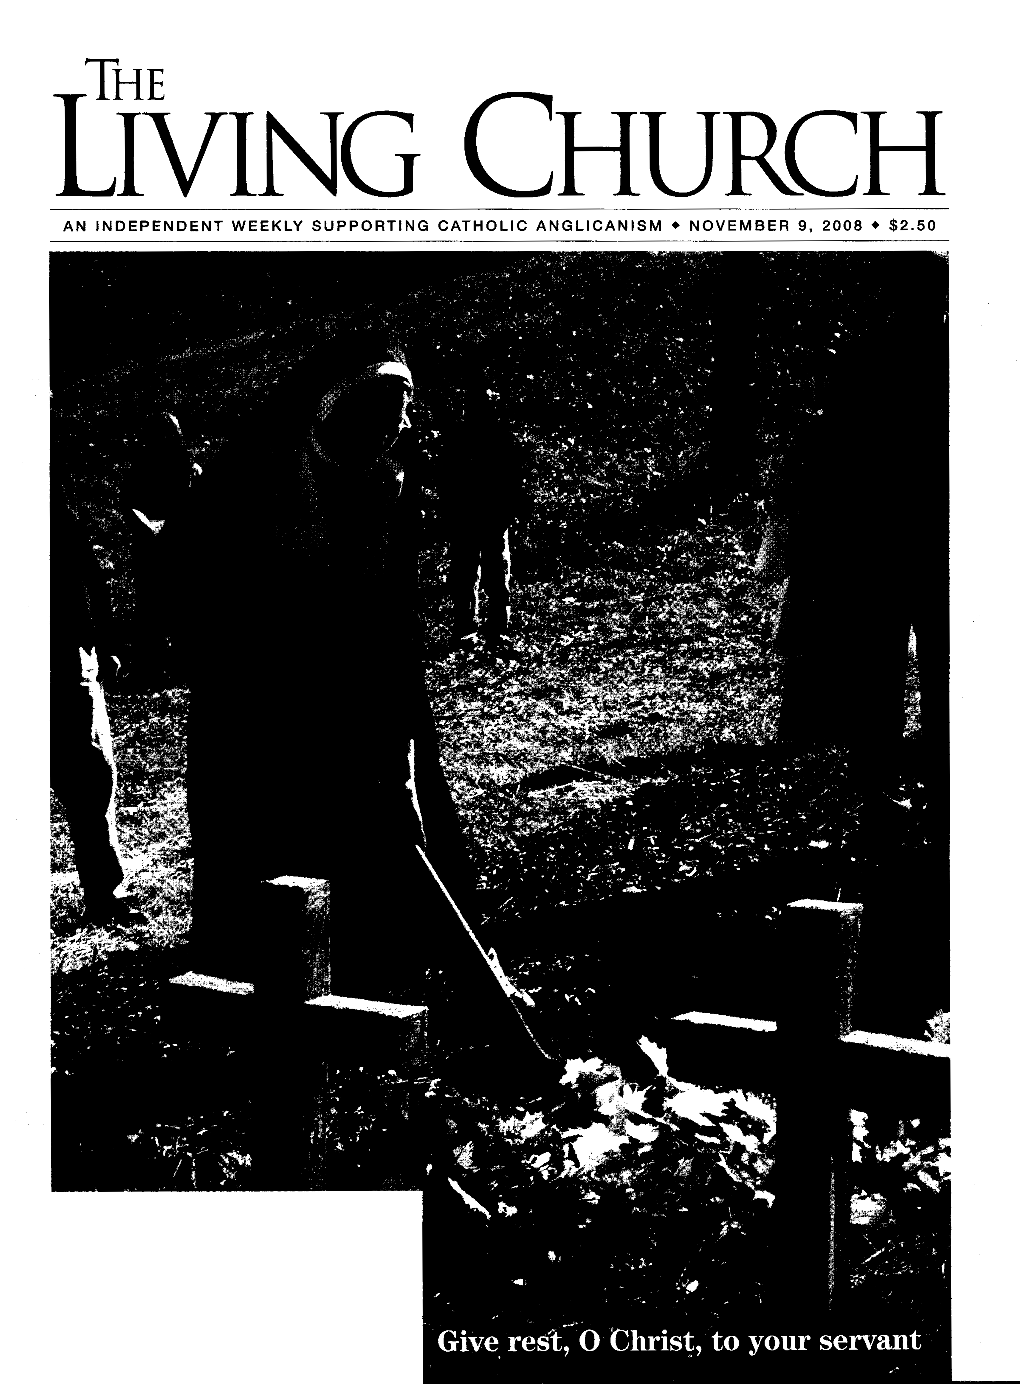 AN INDEPENDENT WEEKLY SUPPORTING CATHOLIC ANGLICANISM • NOVEMBER 9, 2008 • $2.50 Send This Form Or Call Us Toll Free at 1-800-211-2771